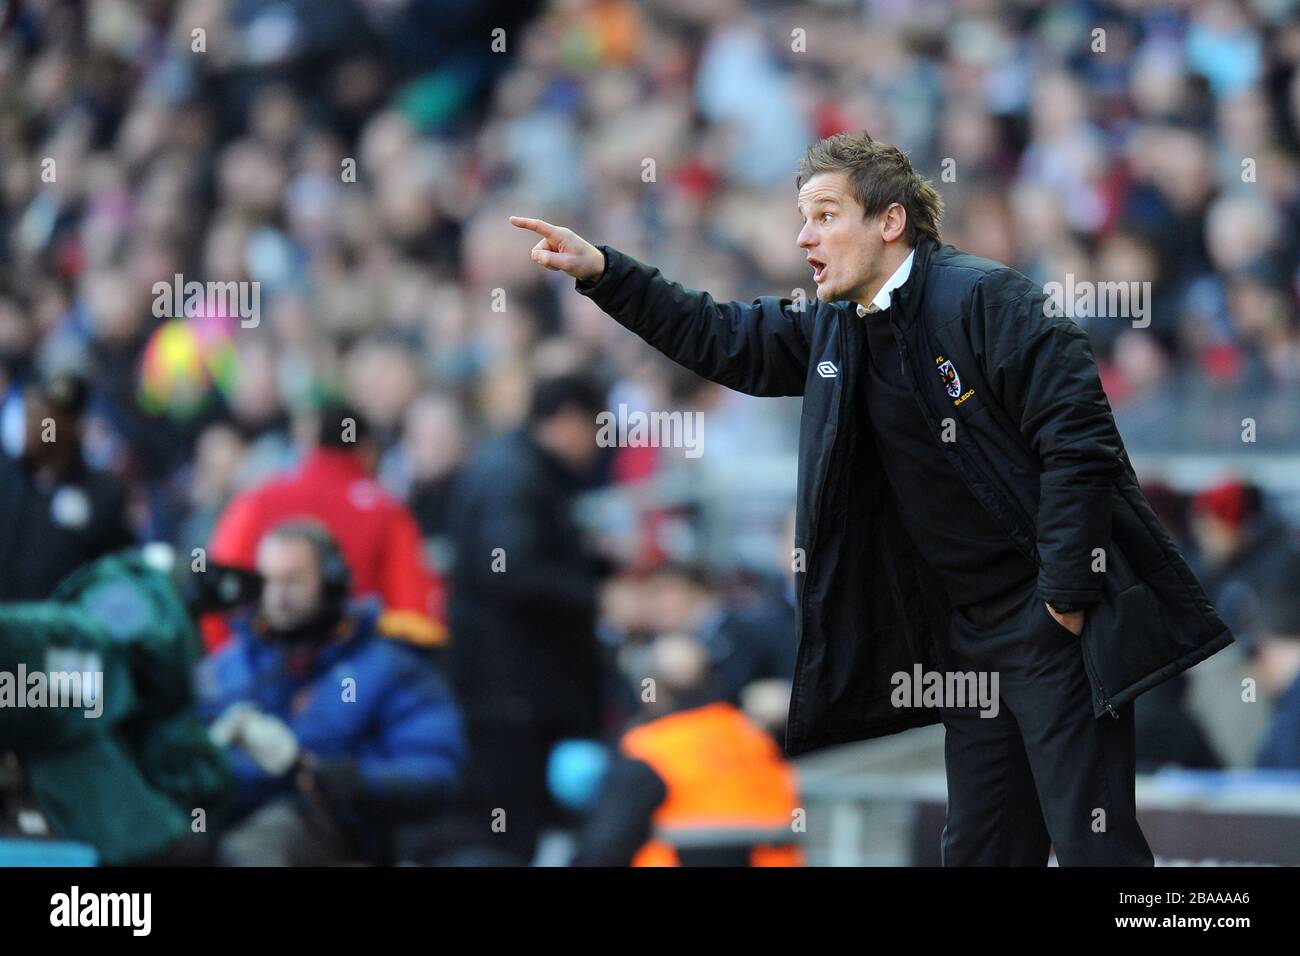 AFC Wimbledon manager Neal Ardley on the touchline Stock Photo